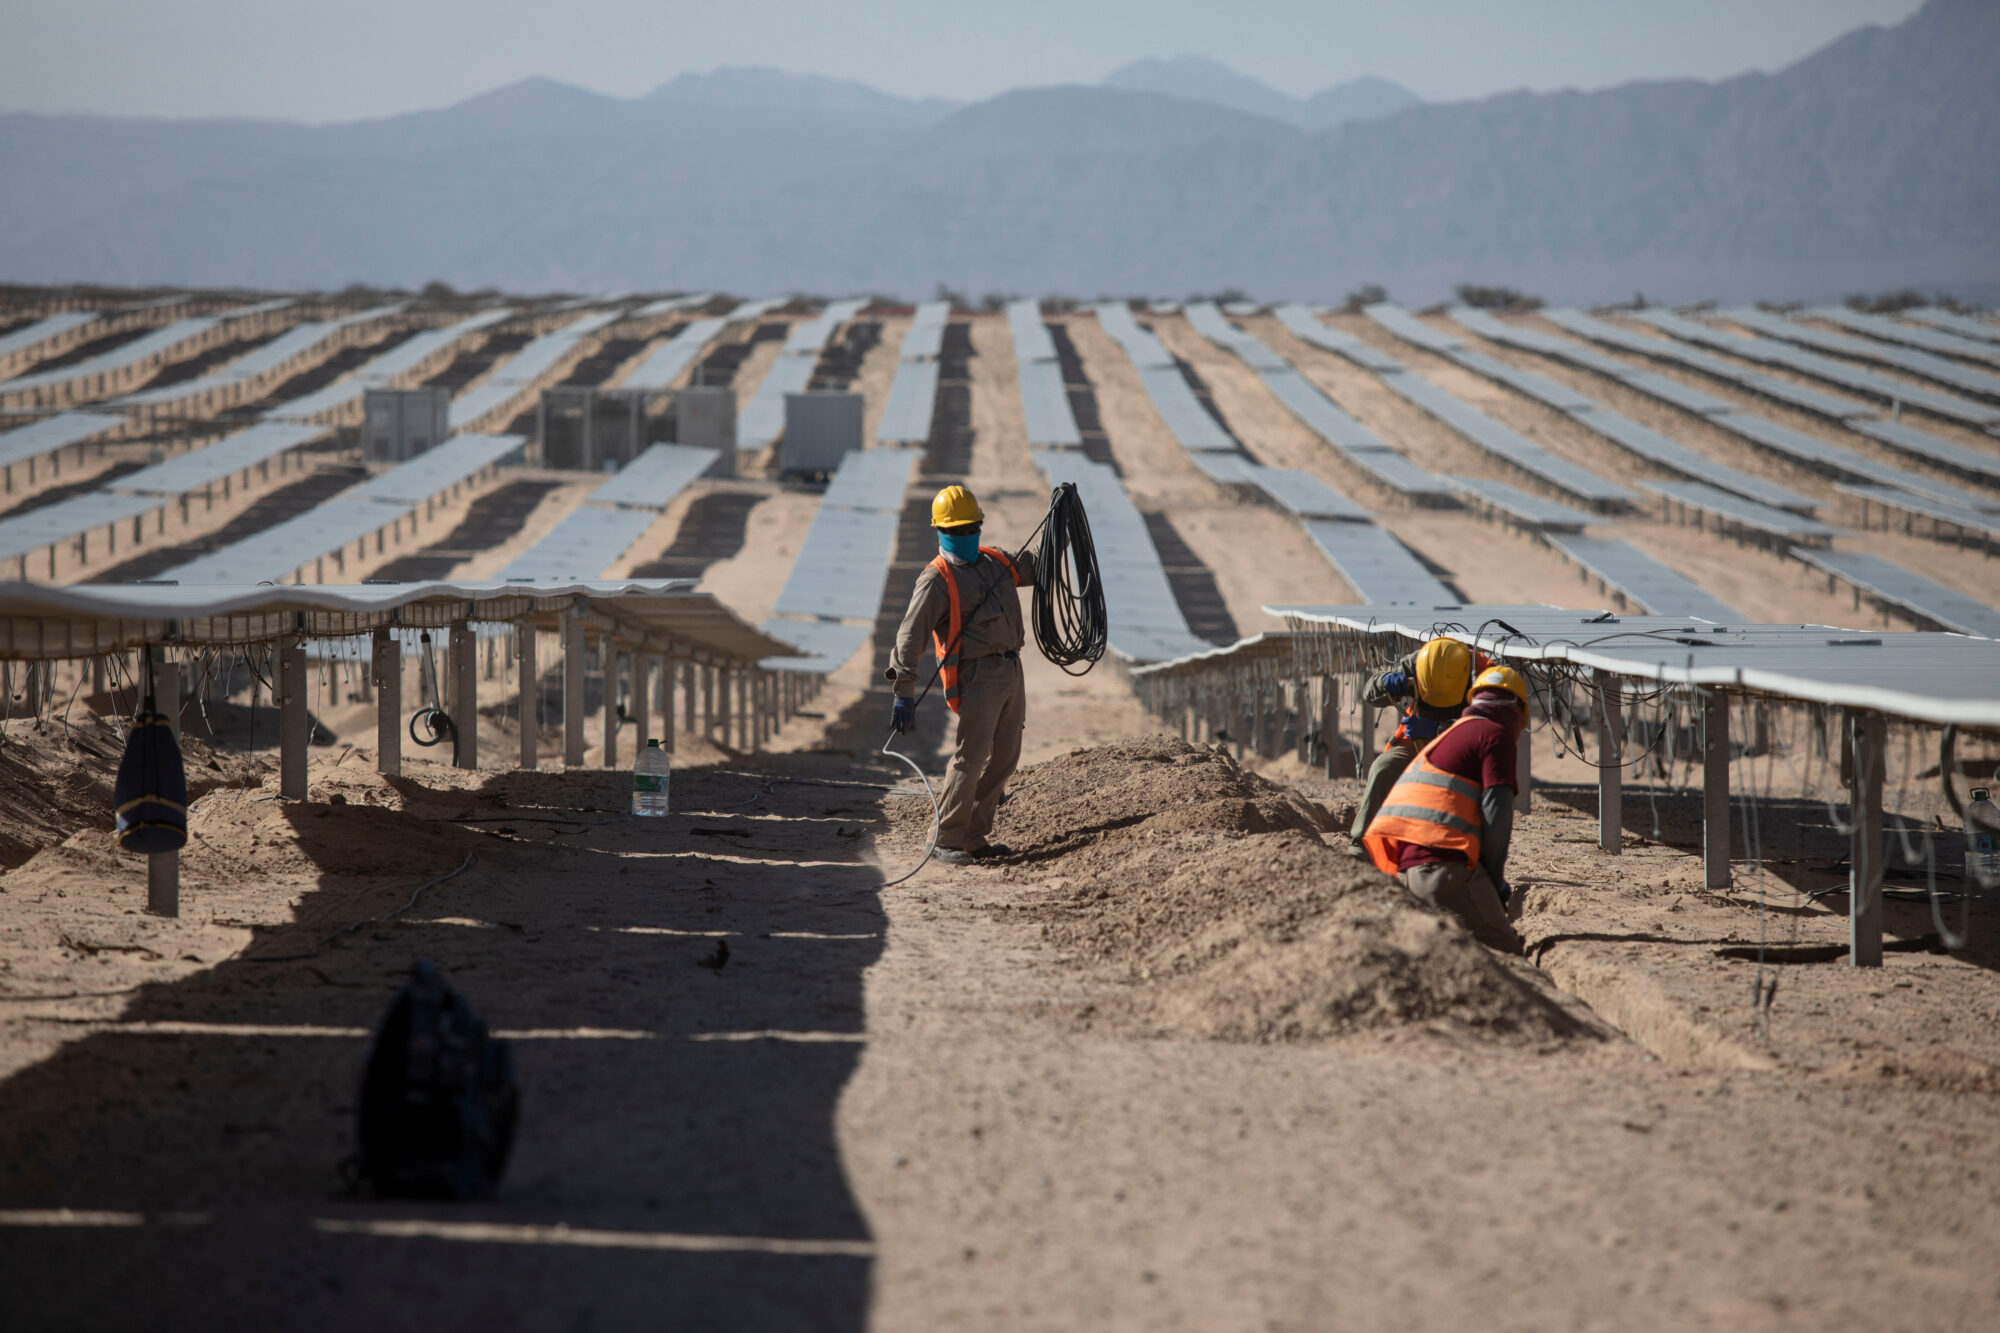 <p>Workers install solar panels at a plant in Cafayate, Salta province, Argentina, built by PowerChina. The country&#8217;s recent agreement to join the Belt and Road Initiative is set to bring further Chinese investment in renewable energy projects. (Image: Martin Zabala / Alamy)</p>